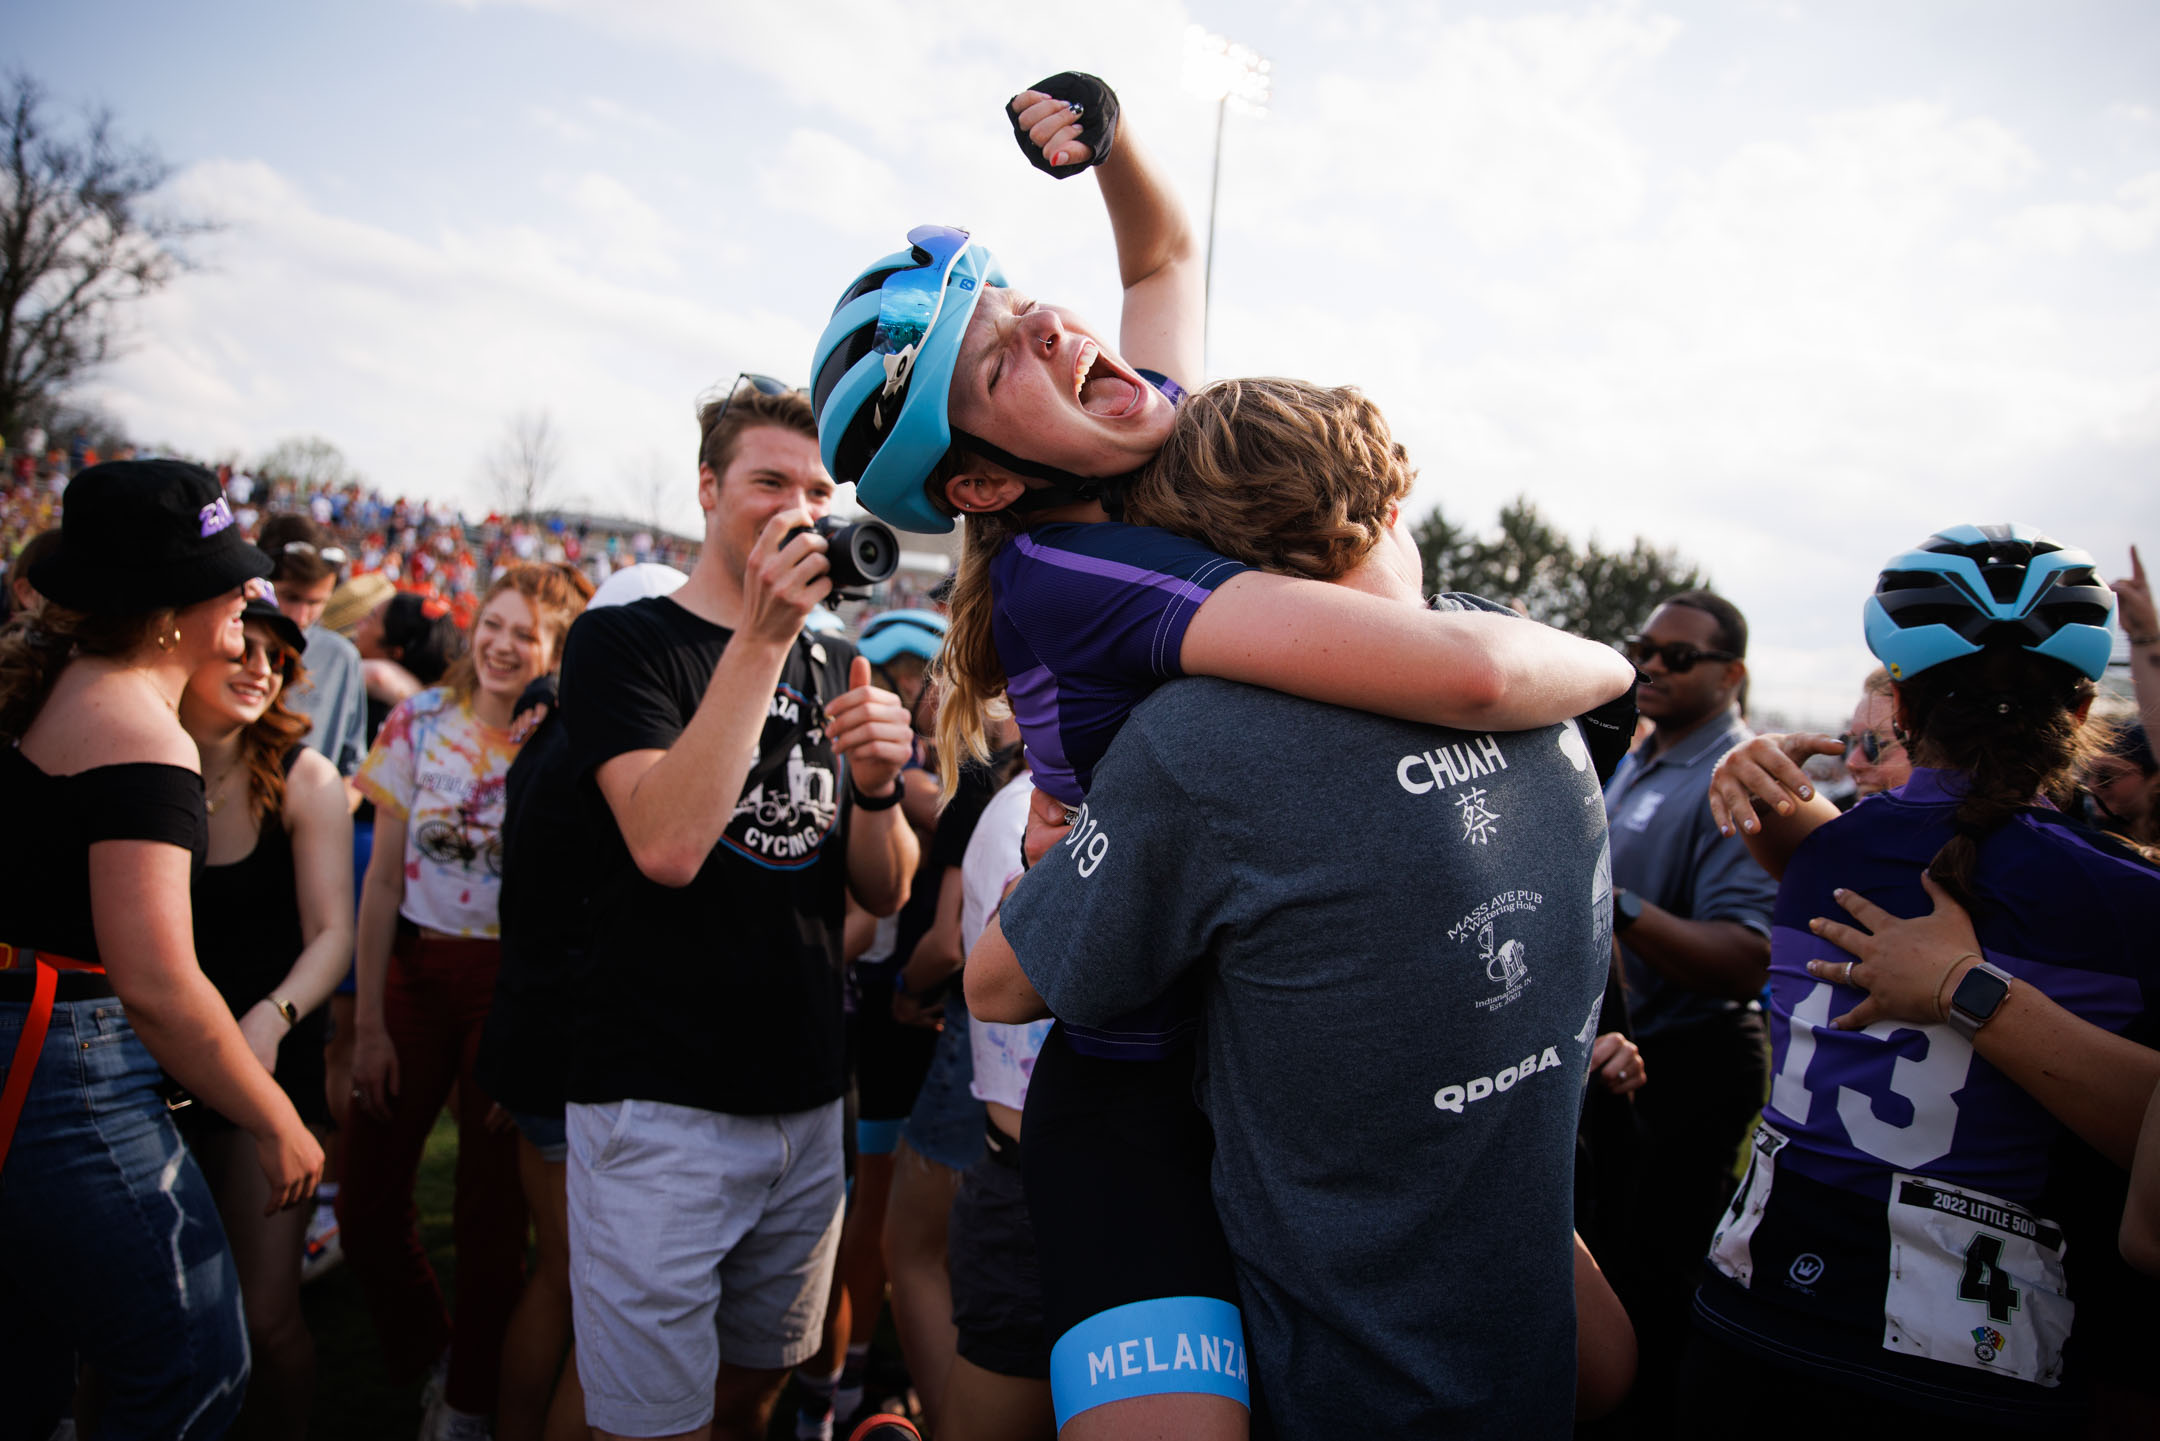 Melanzana Cycling rider Abby Teed celebrates with fans after winning the Women's Little 500 at Bill Armstrong Stadium on Friday, April 22, 2022. (James Brosher/Indiana University)